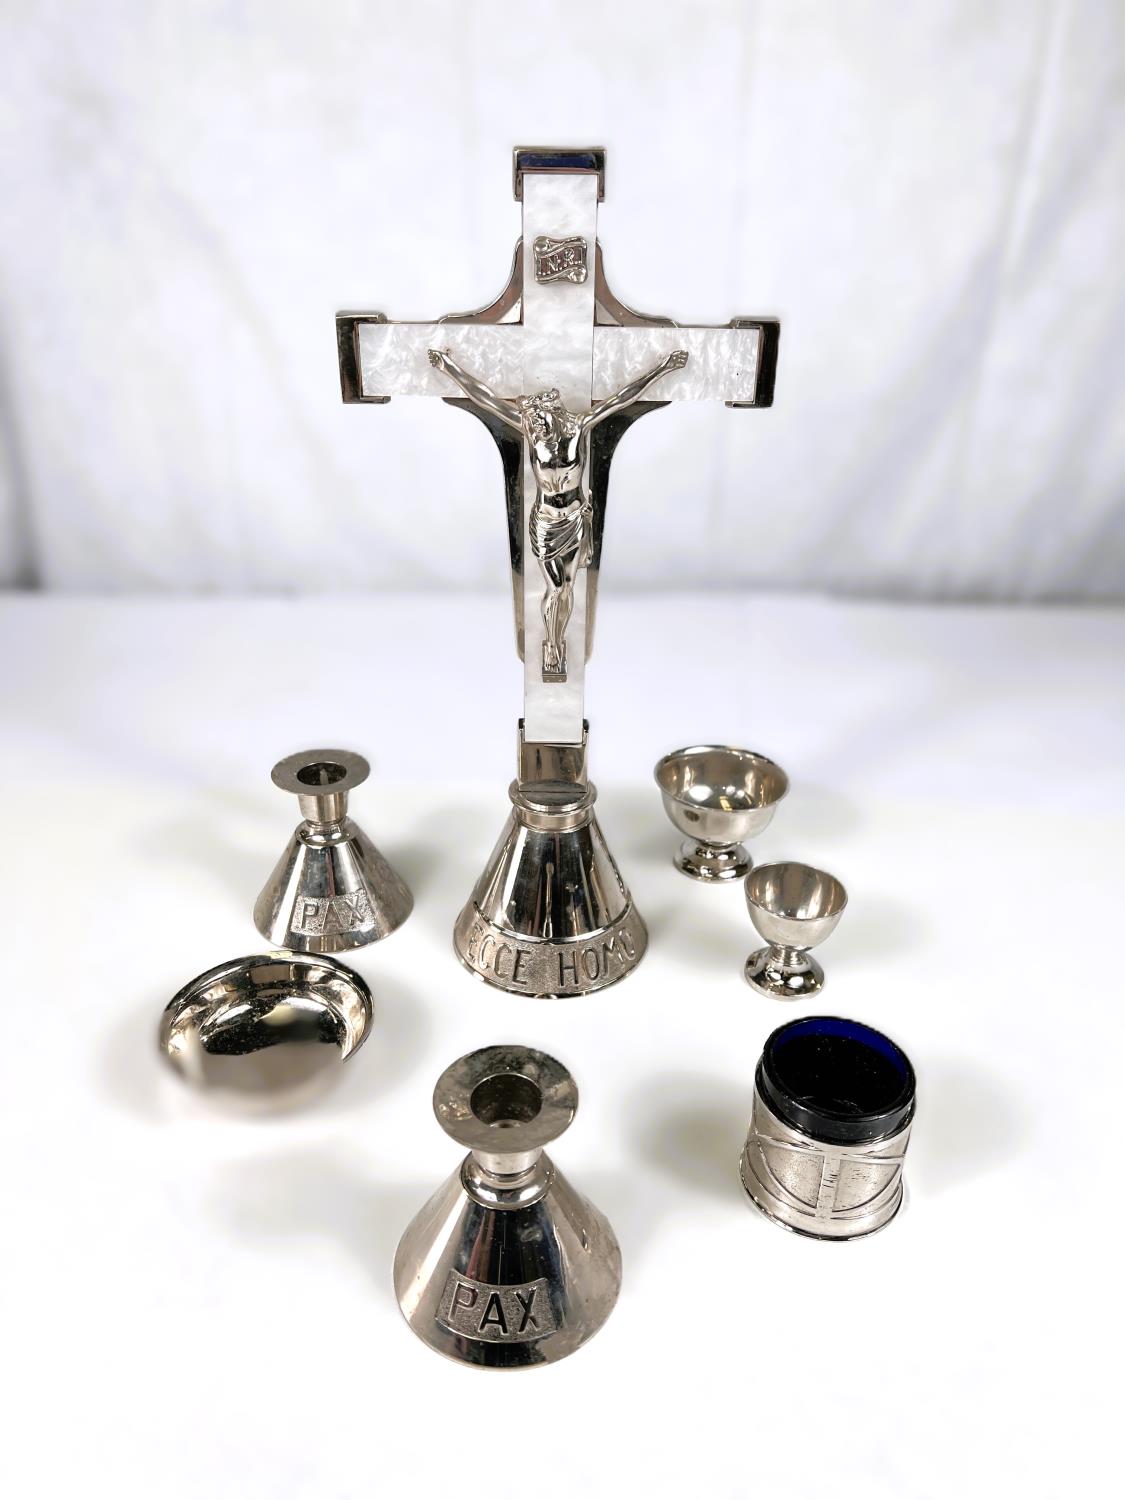 A silver plated altar set with crucifix, candlesticks etc - Image 3 of 8